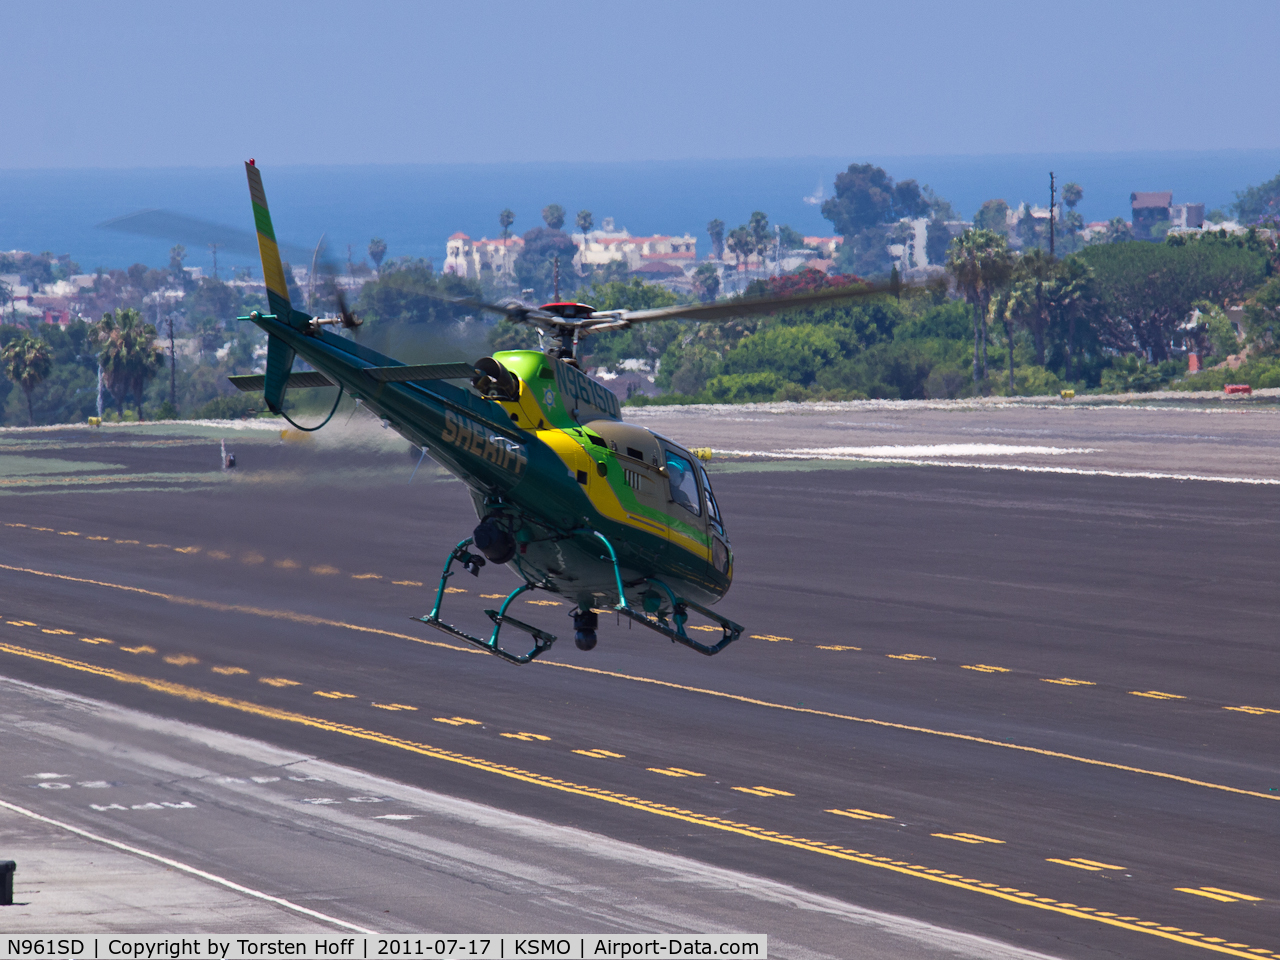 N961SD, 2001 Eurocopter AS-350B-2 Ecureuil Ecureuil C/N 3516, N961SD leaving the helipad and departing from RWY 21